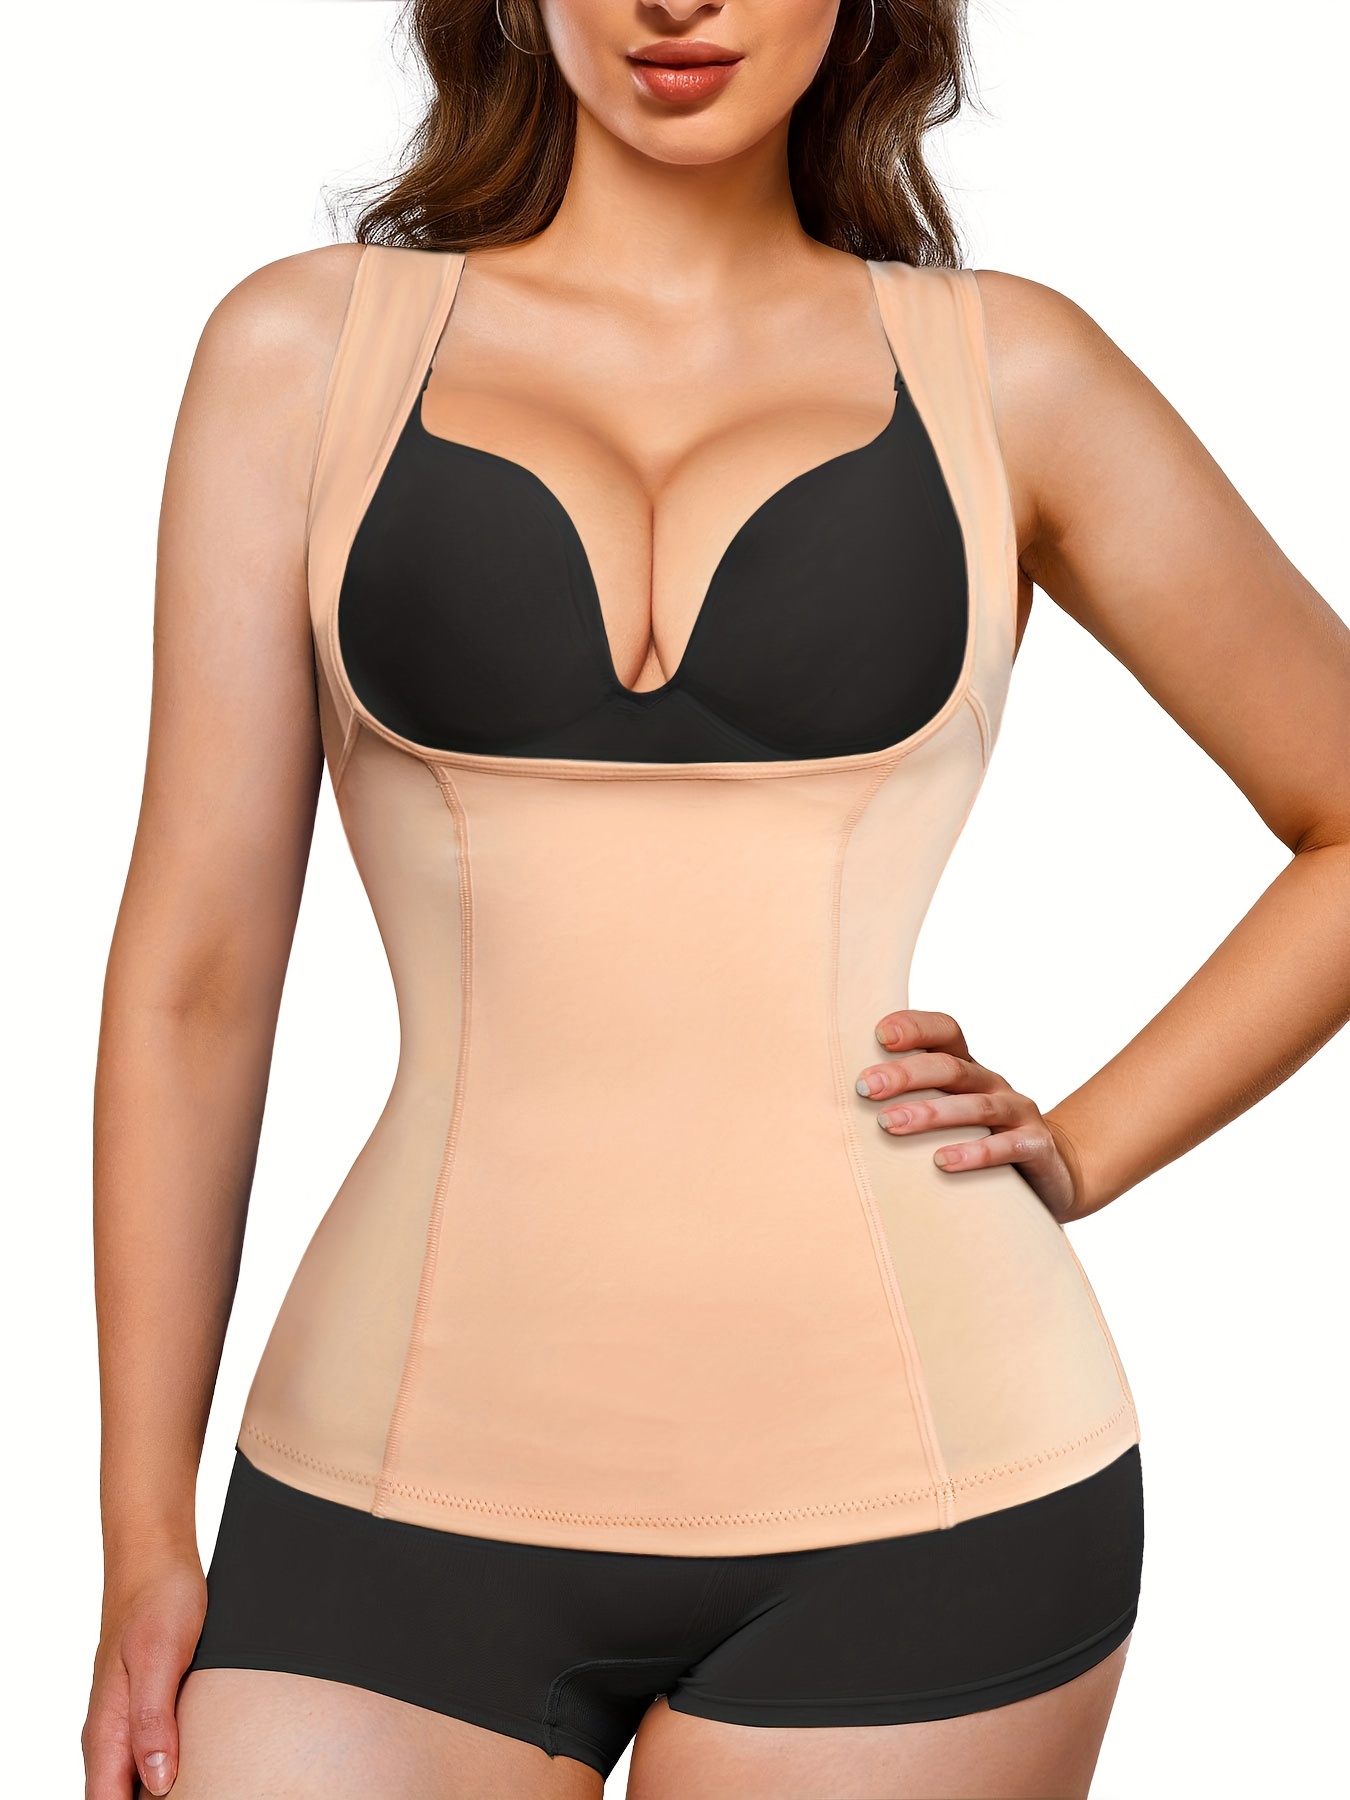 ShapeShape Womens Camisole Tank Top Slimming Shape Control, Waist Trainer  Vest For Tummy, Body, And Seamless Look From Littlebirdofficialst, $22.17